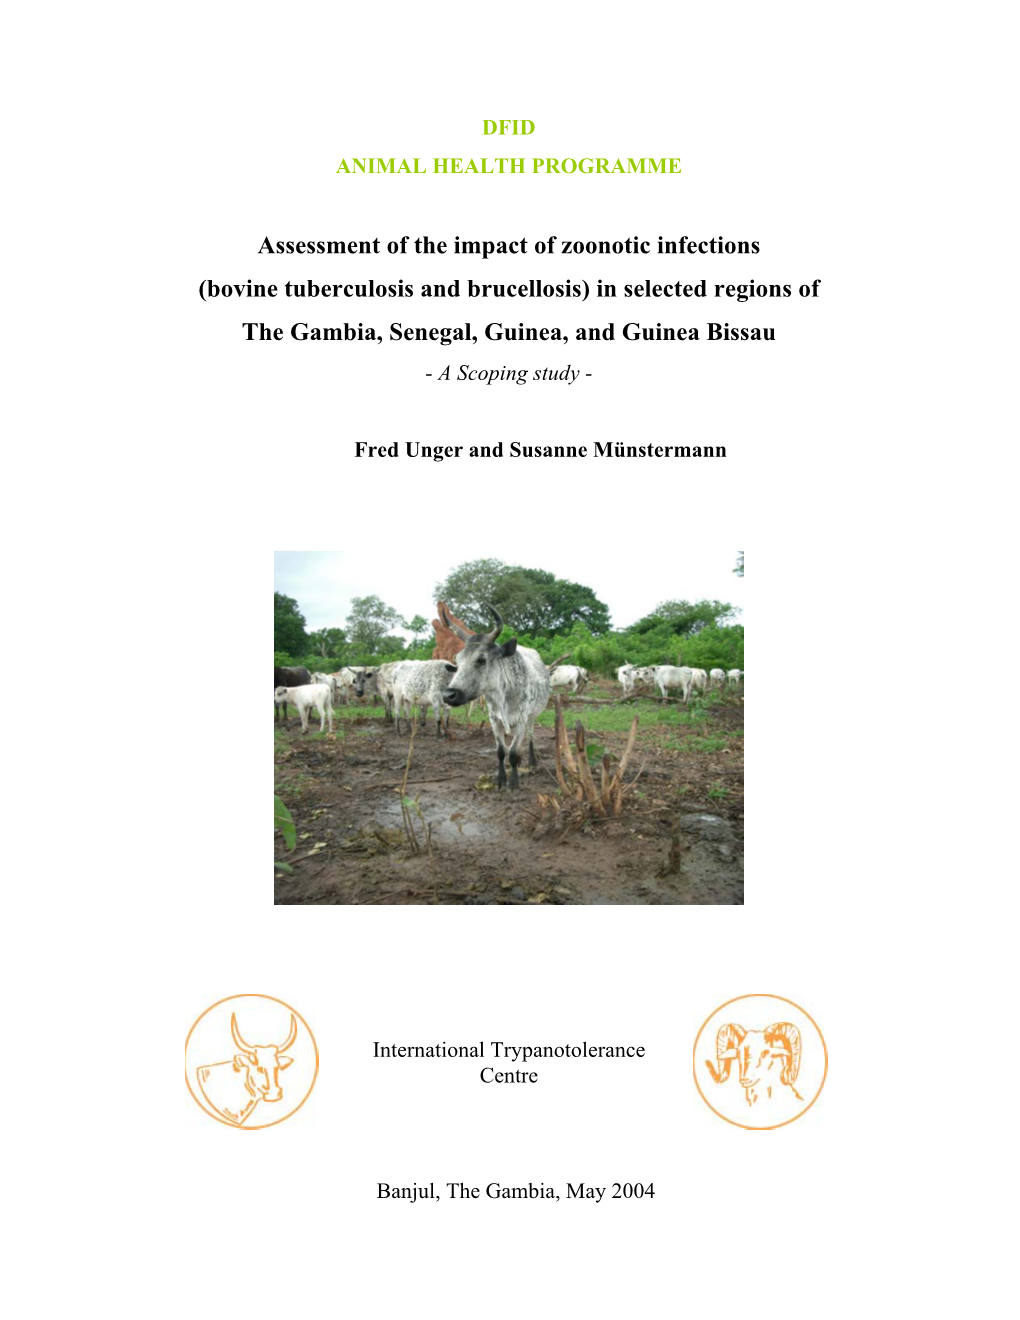 Assessment of the Impact of Zoonotic Infections (Bovine